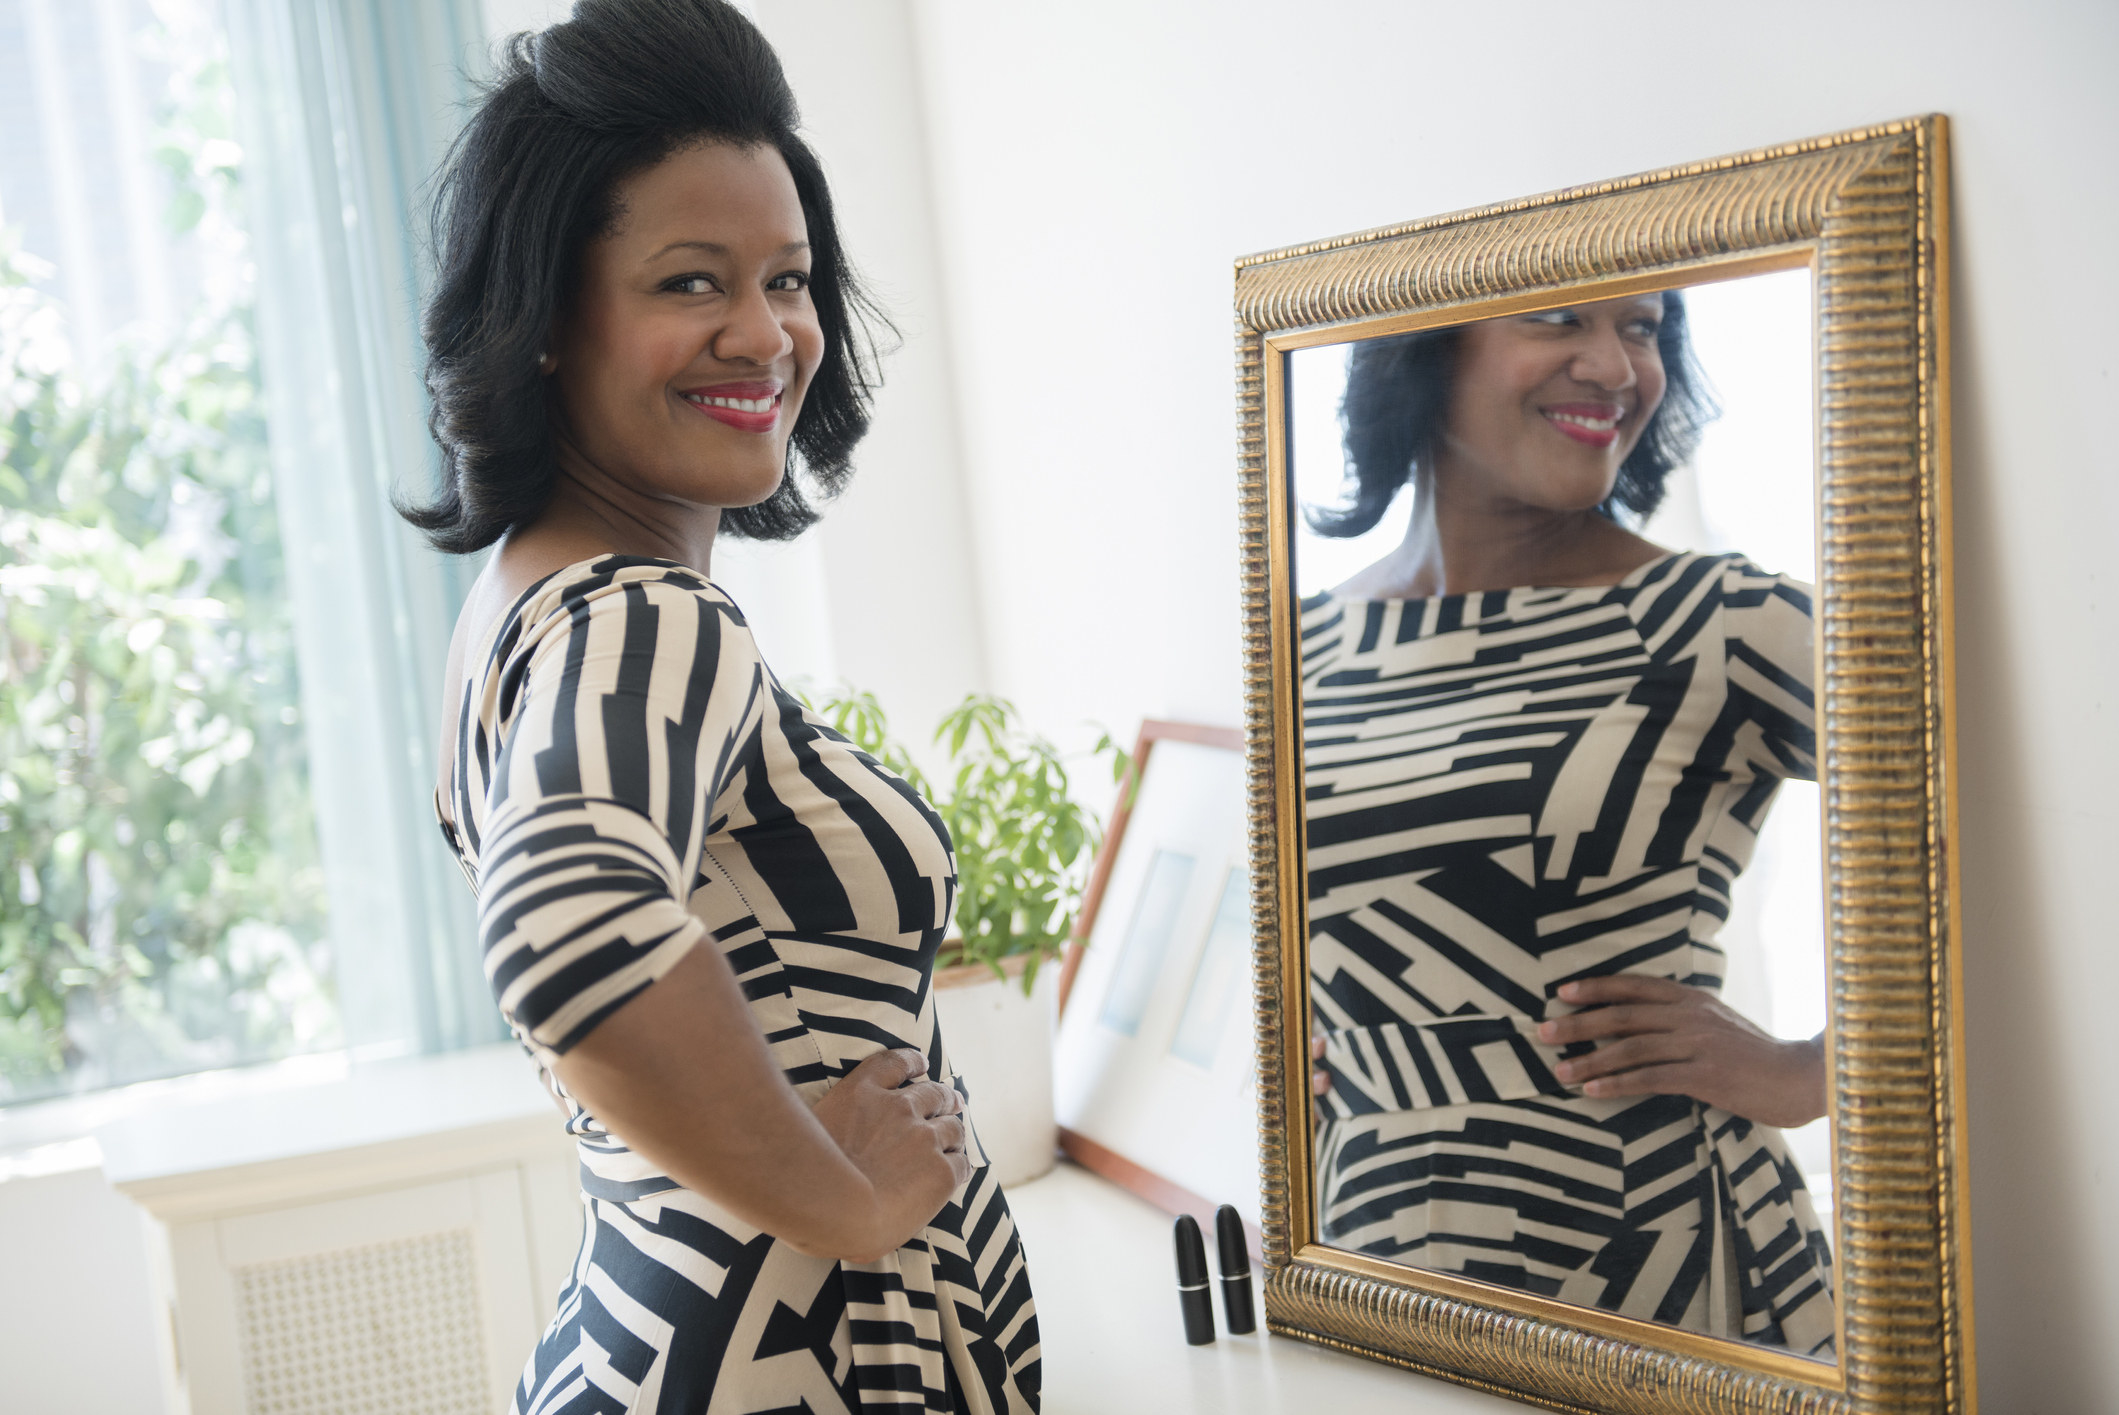 Smiling woman standing in front of a mirror and wearing a dress